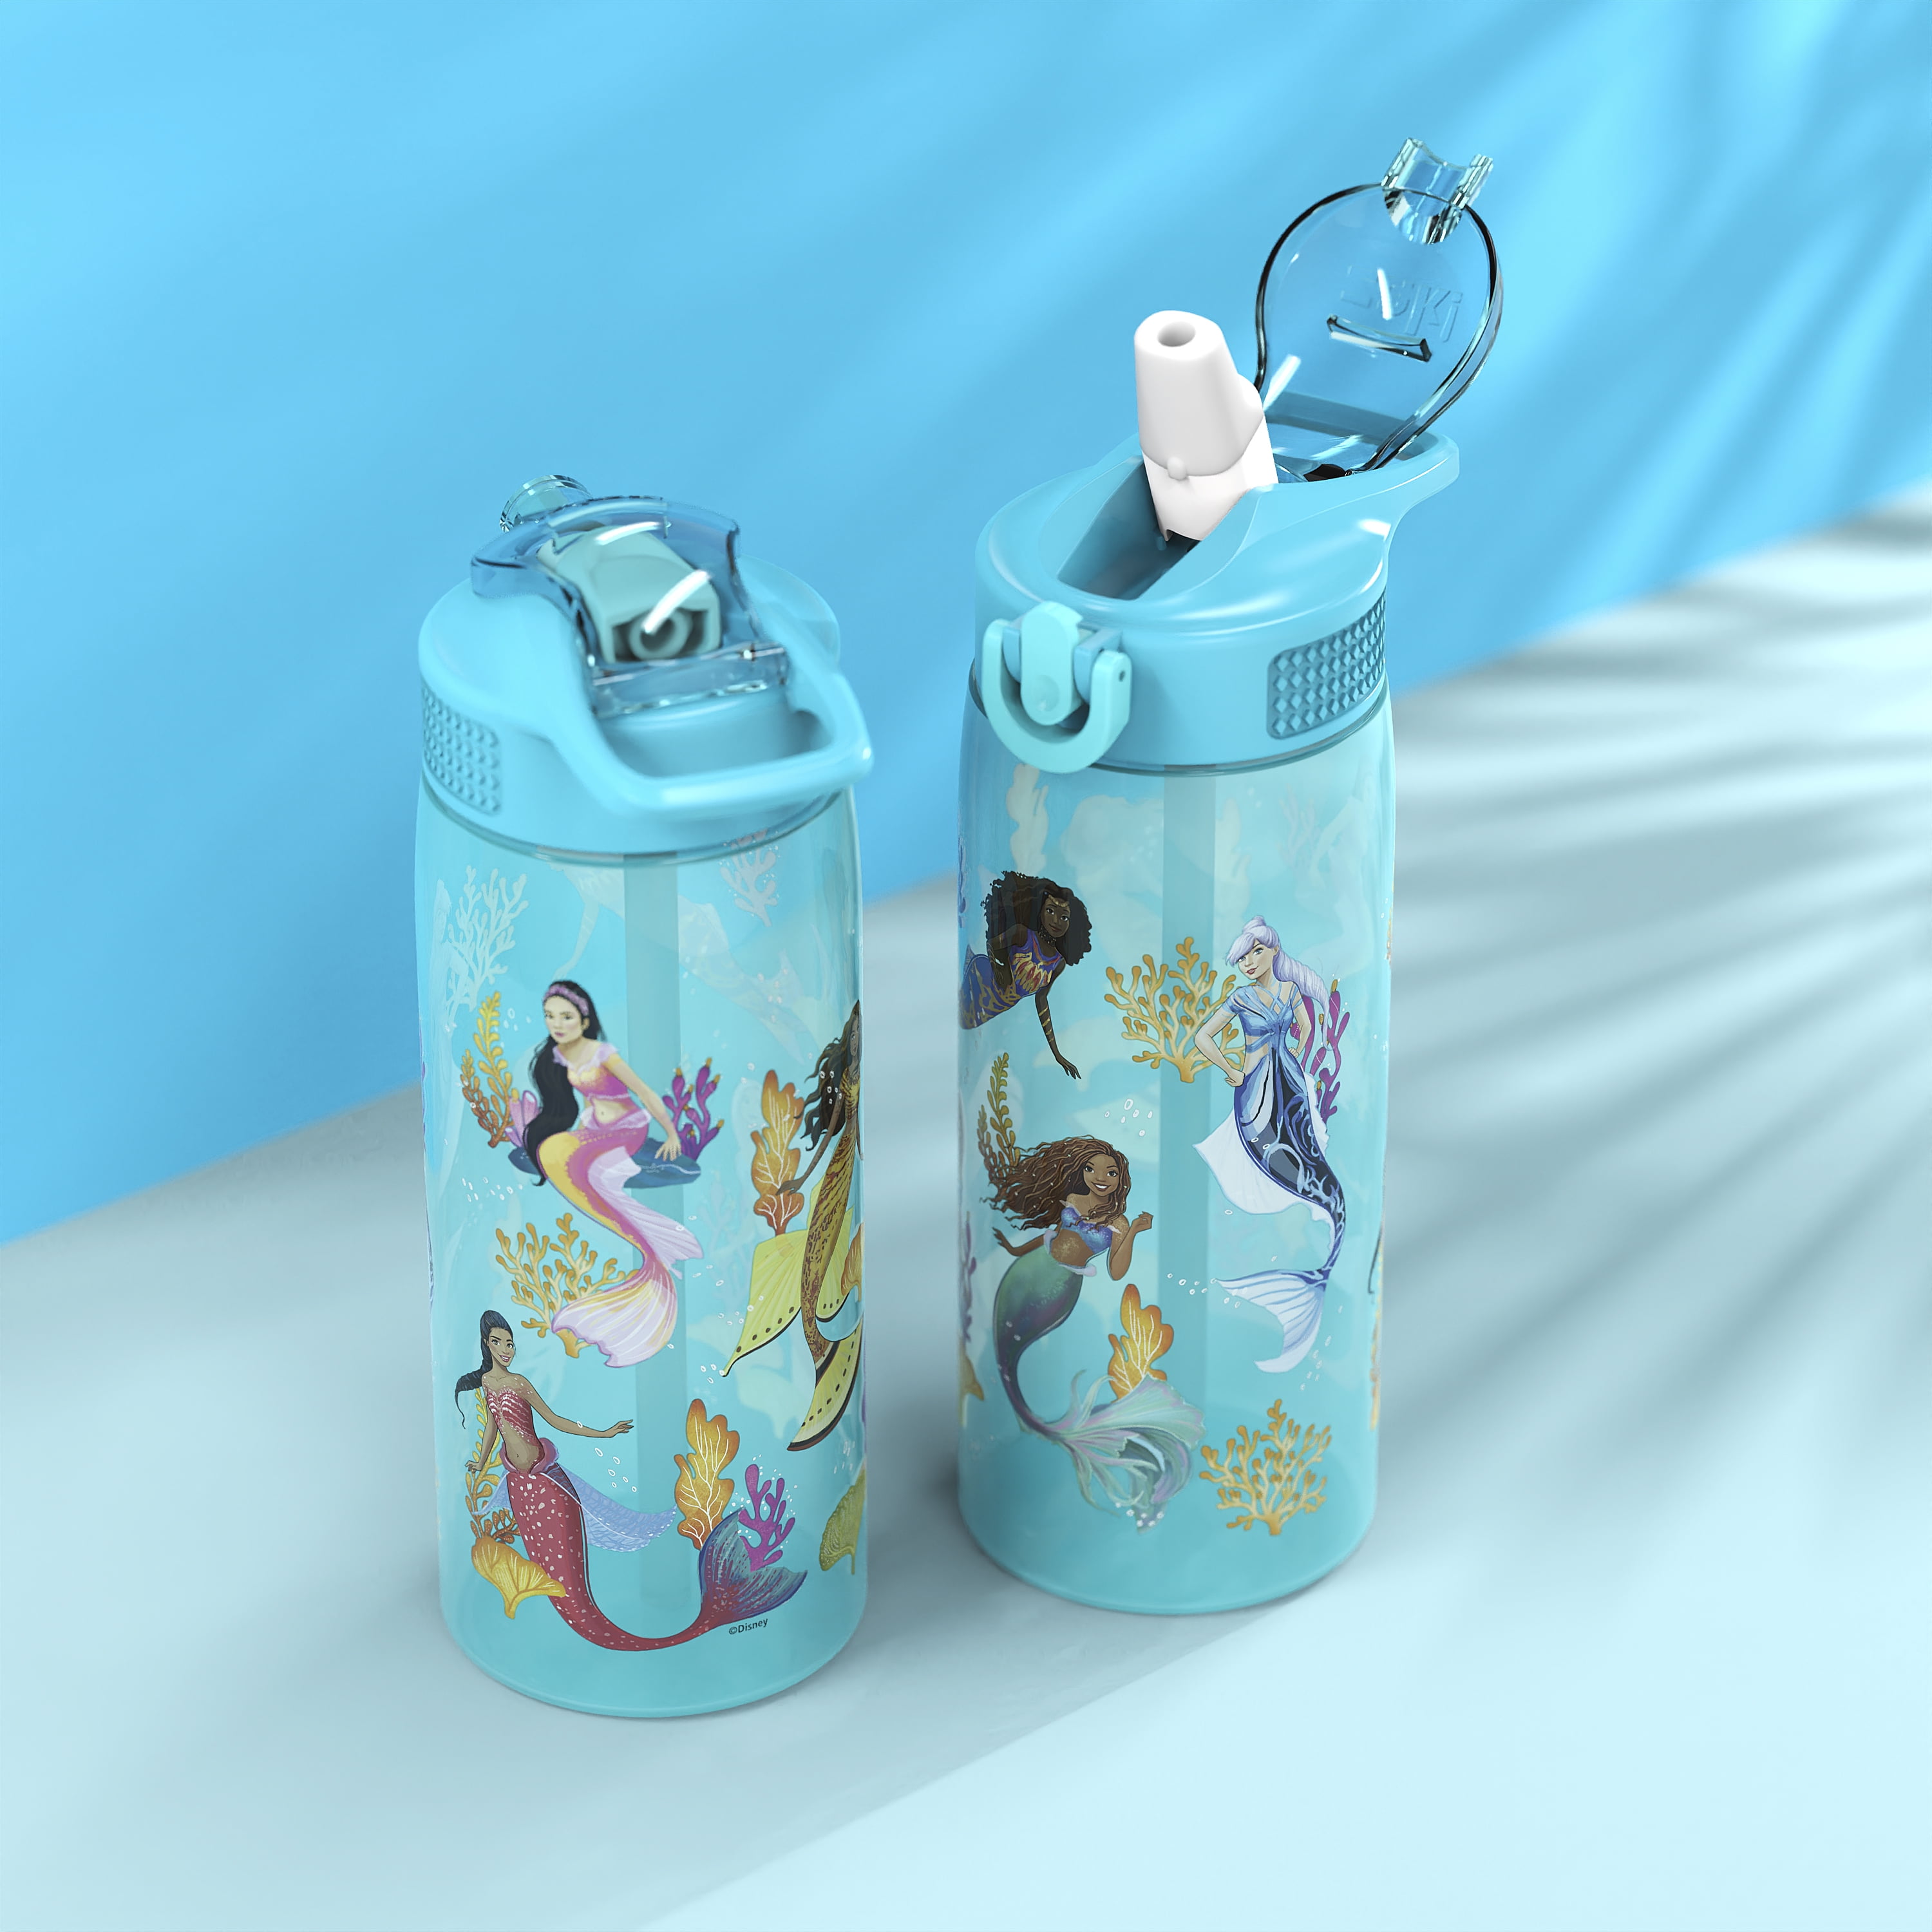 The Little Mermaid Stainless Steel Water Bottle with Built-in Straw Live Action Film - Official shopDisney